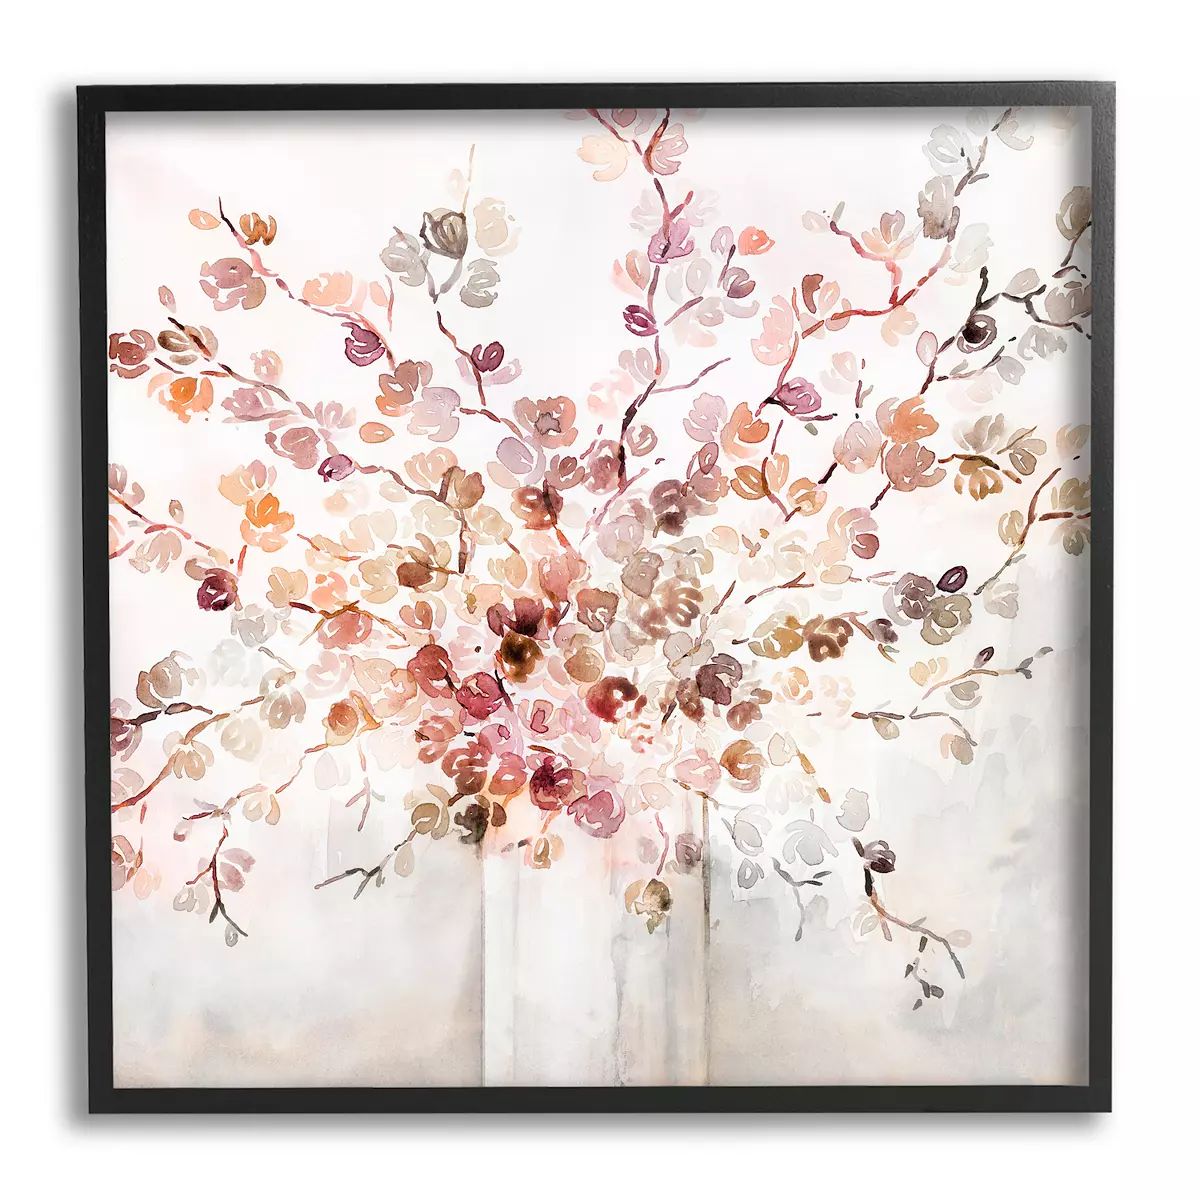 Stupell Home Decor Abstract Warm Floral Vine Bouquet Wall Decor | Kohl's